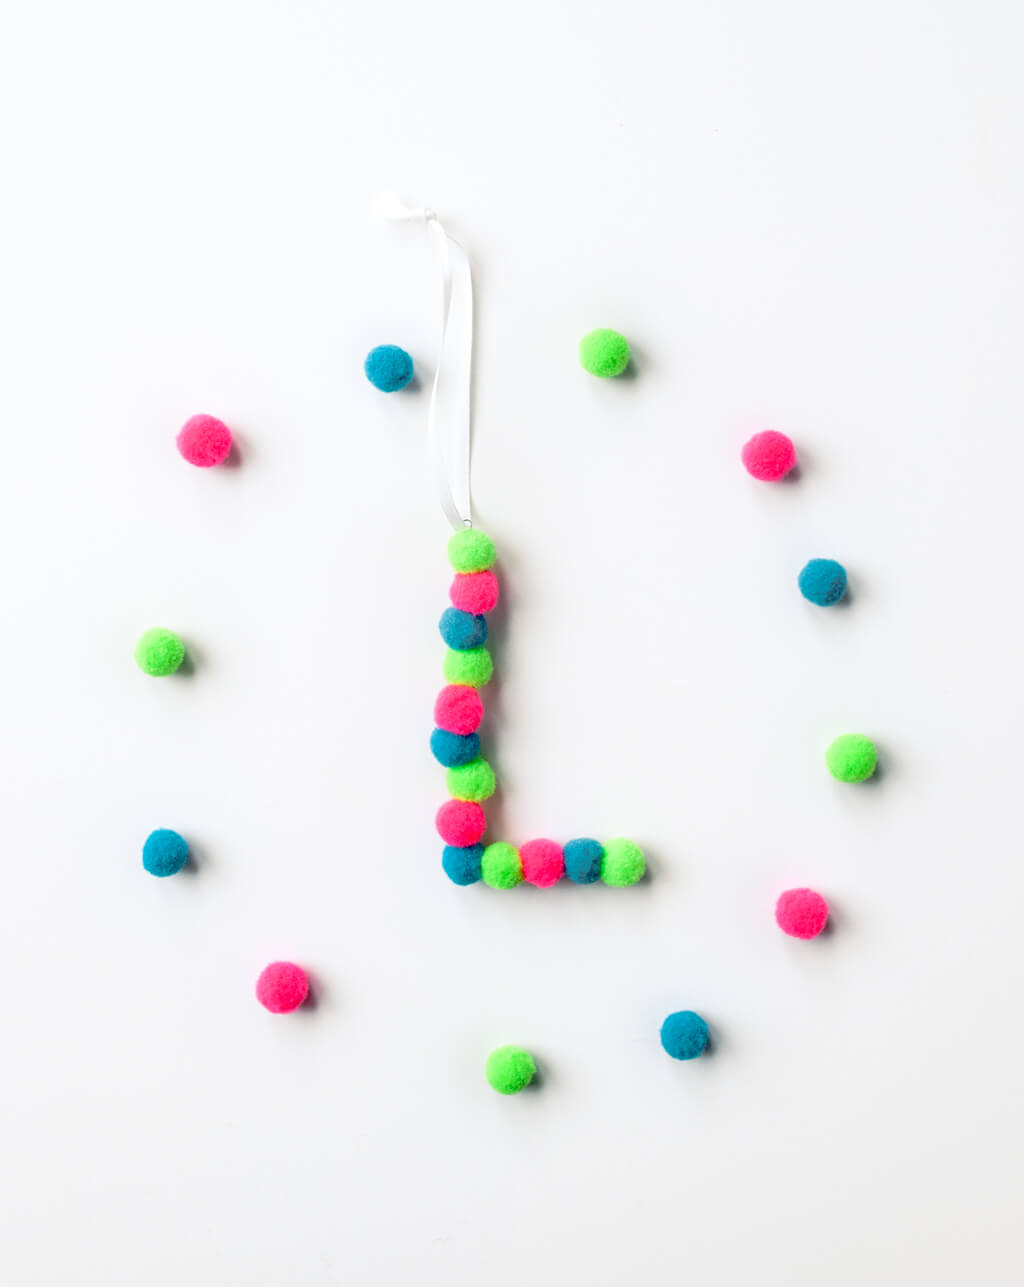 How to make letters out of pom poms #christmasornament #handmadechristmas #pompoms